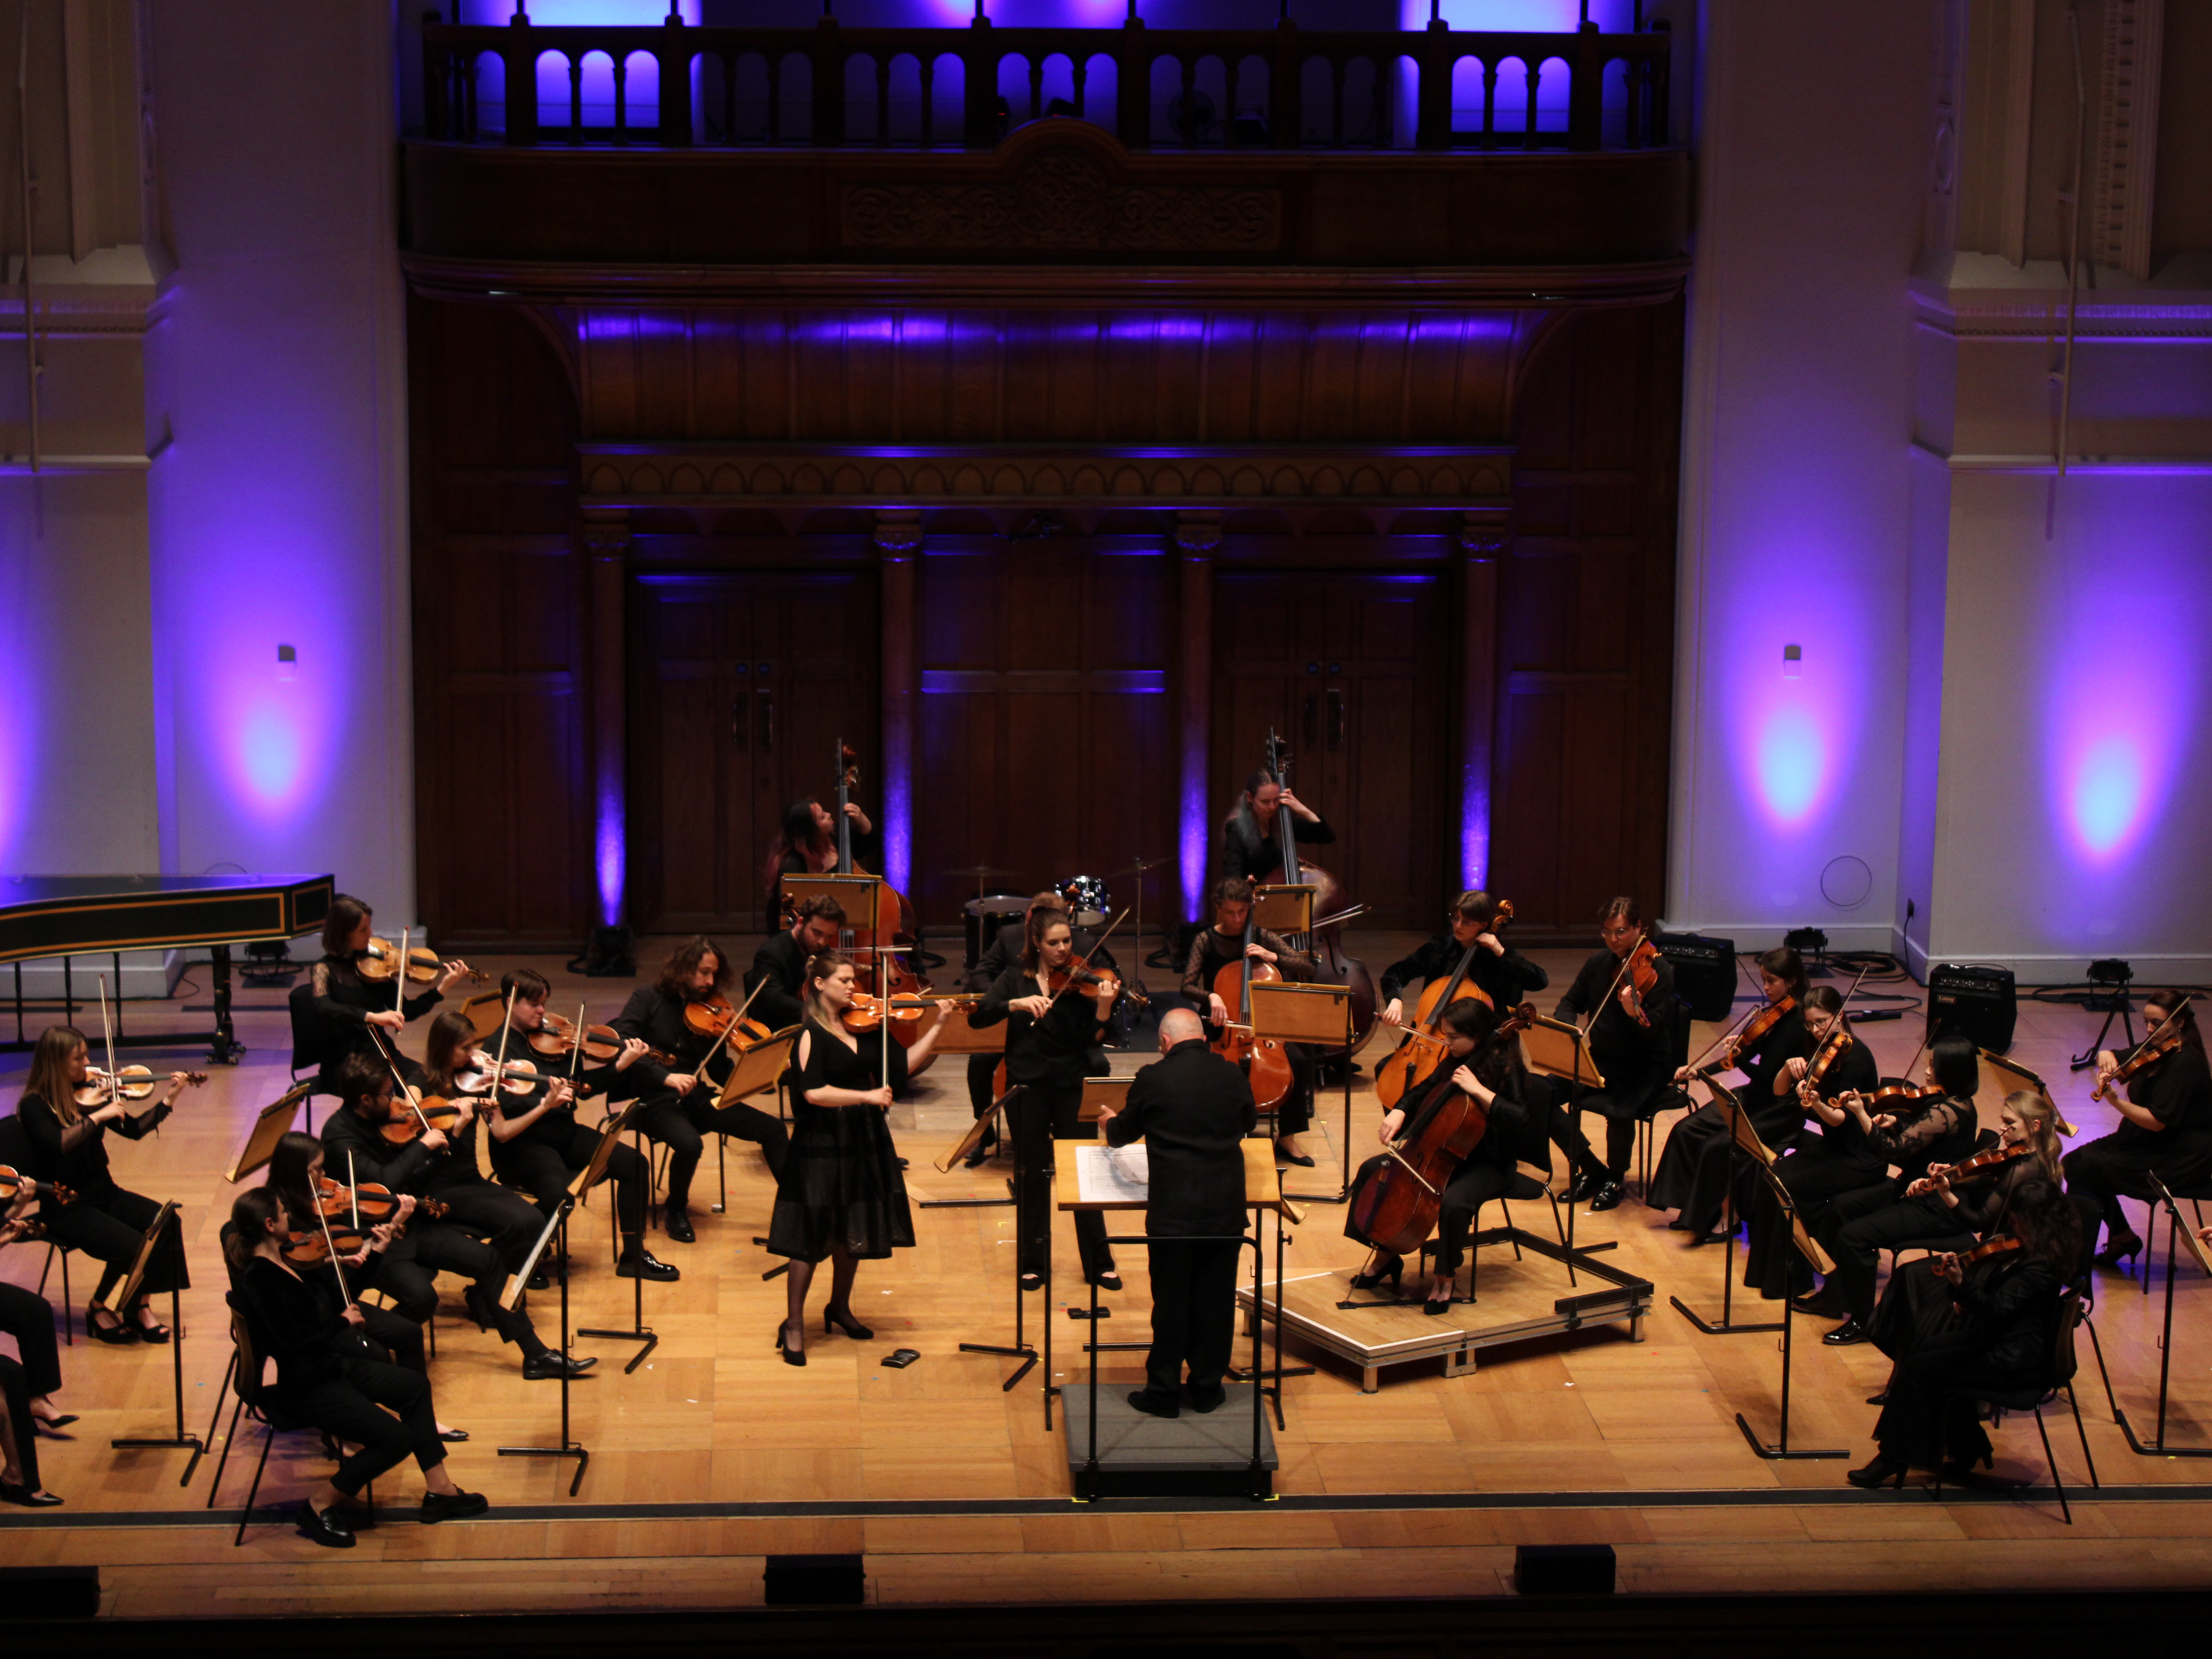 An image of Bath Festival Orchestra on stage in Cadogan Hall London. The hall is lit with purple lights. The orchestra is wearing black and are photographed mid-performance. The conductor stands at the front.